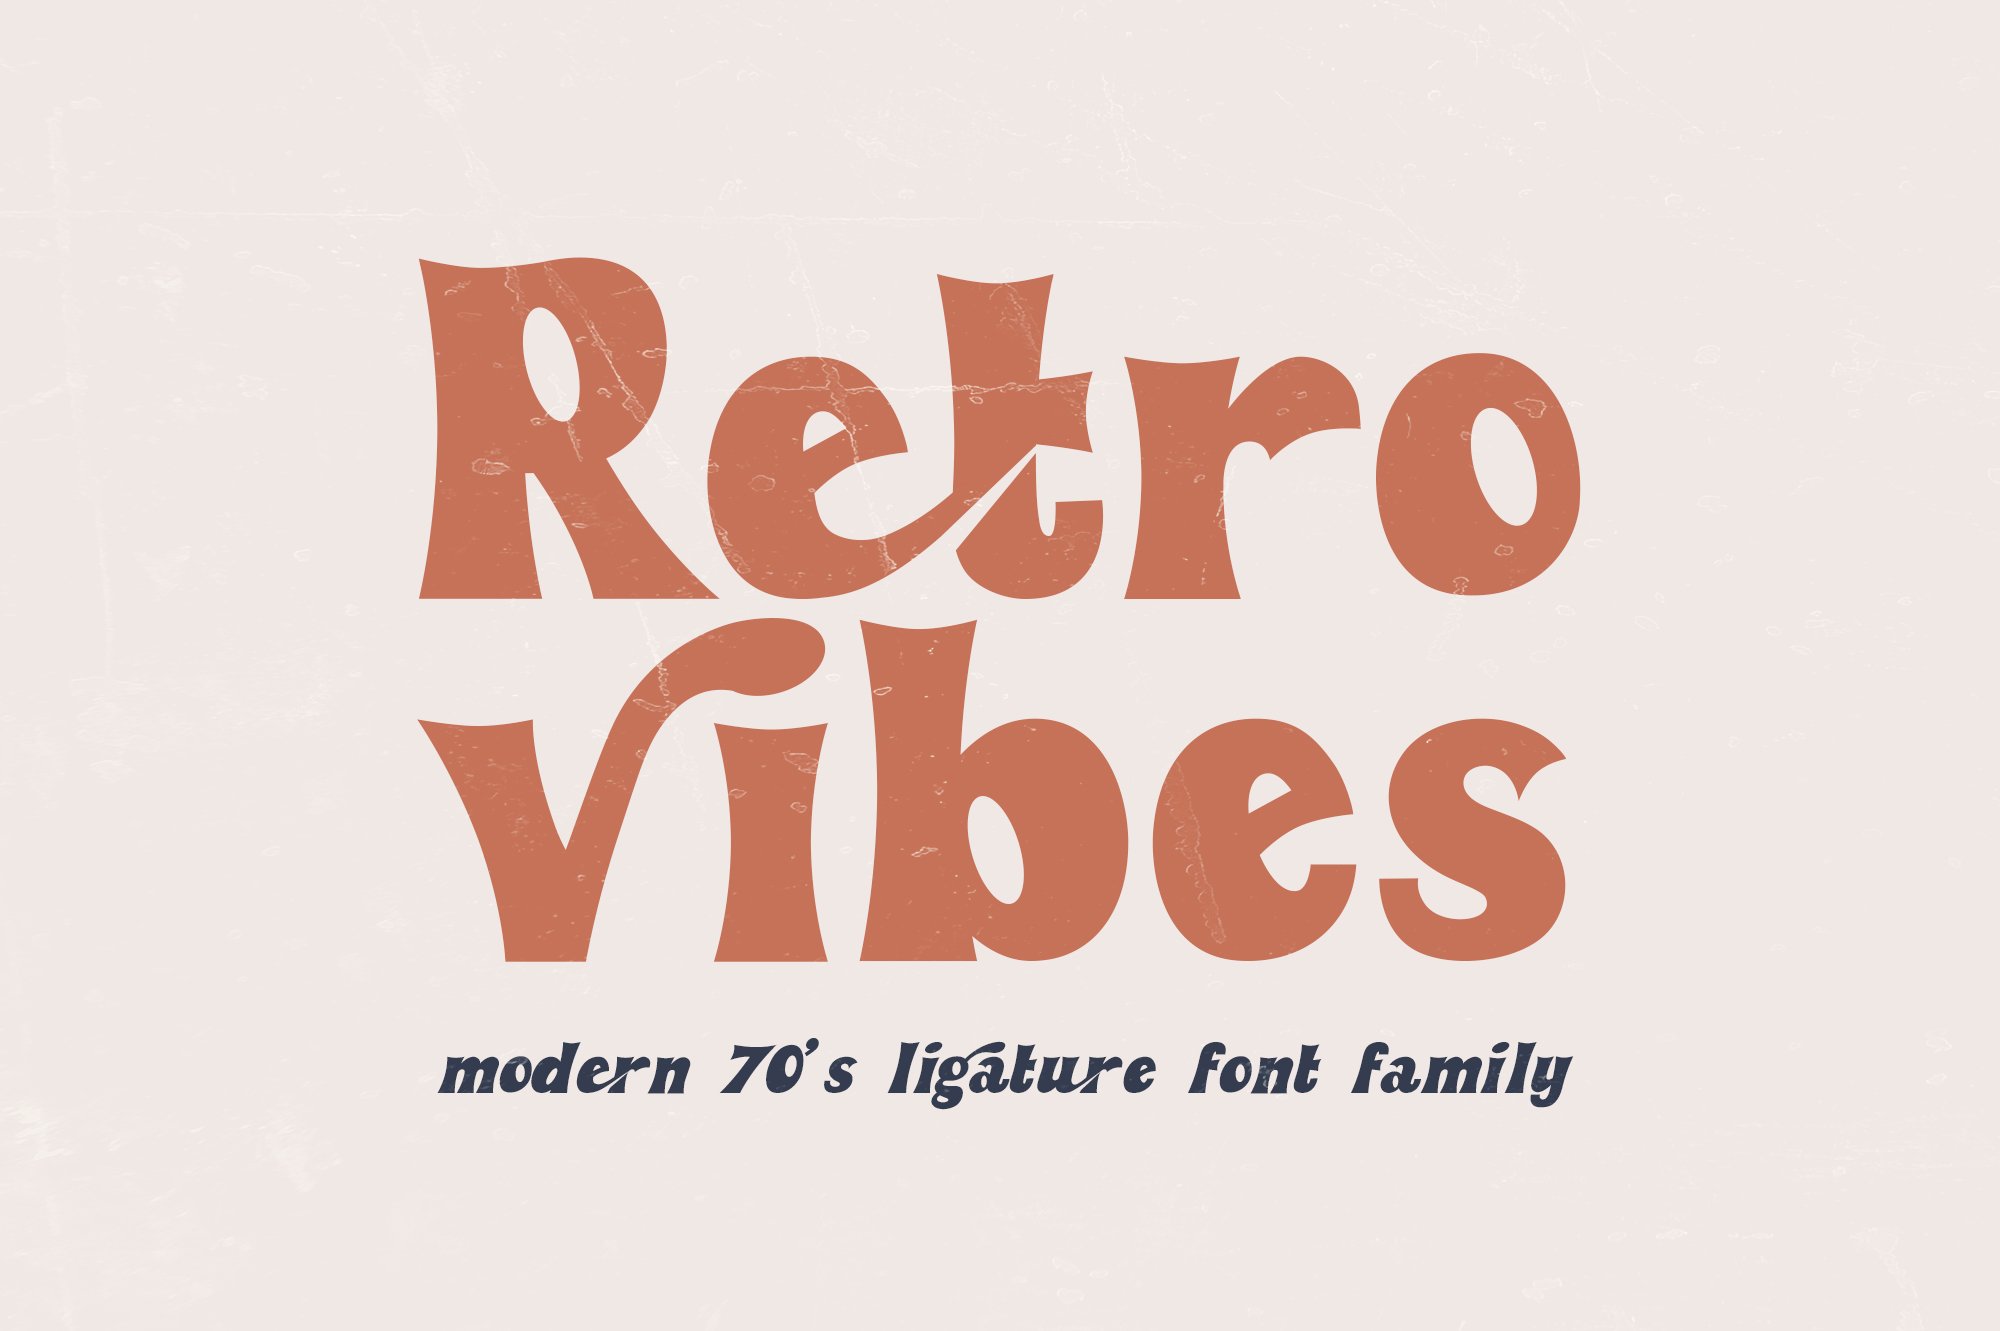 Retro Vibes | Vintage Bold Font cover image.